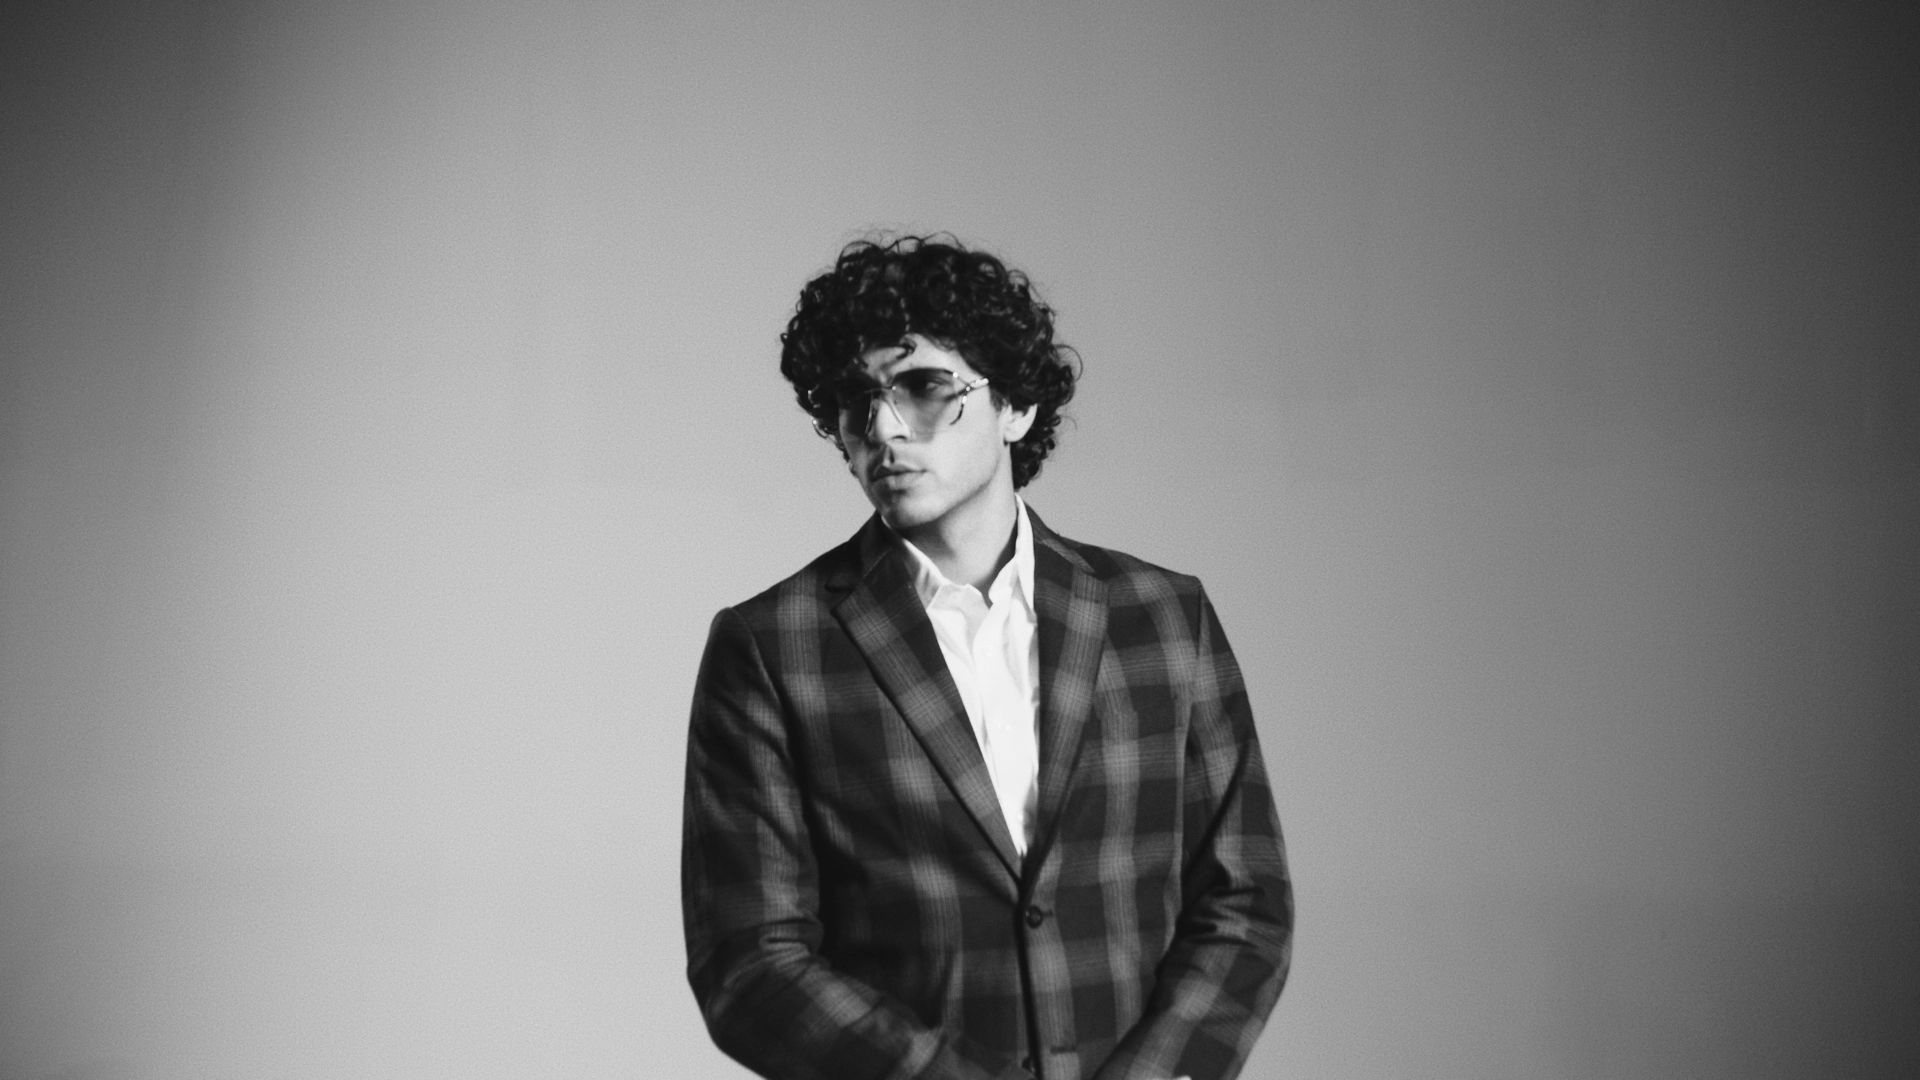 Headshot of man with curly hair wearing glasses posing in a suit